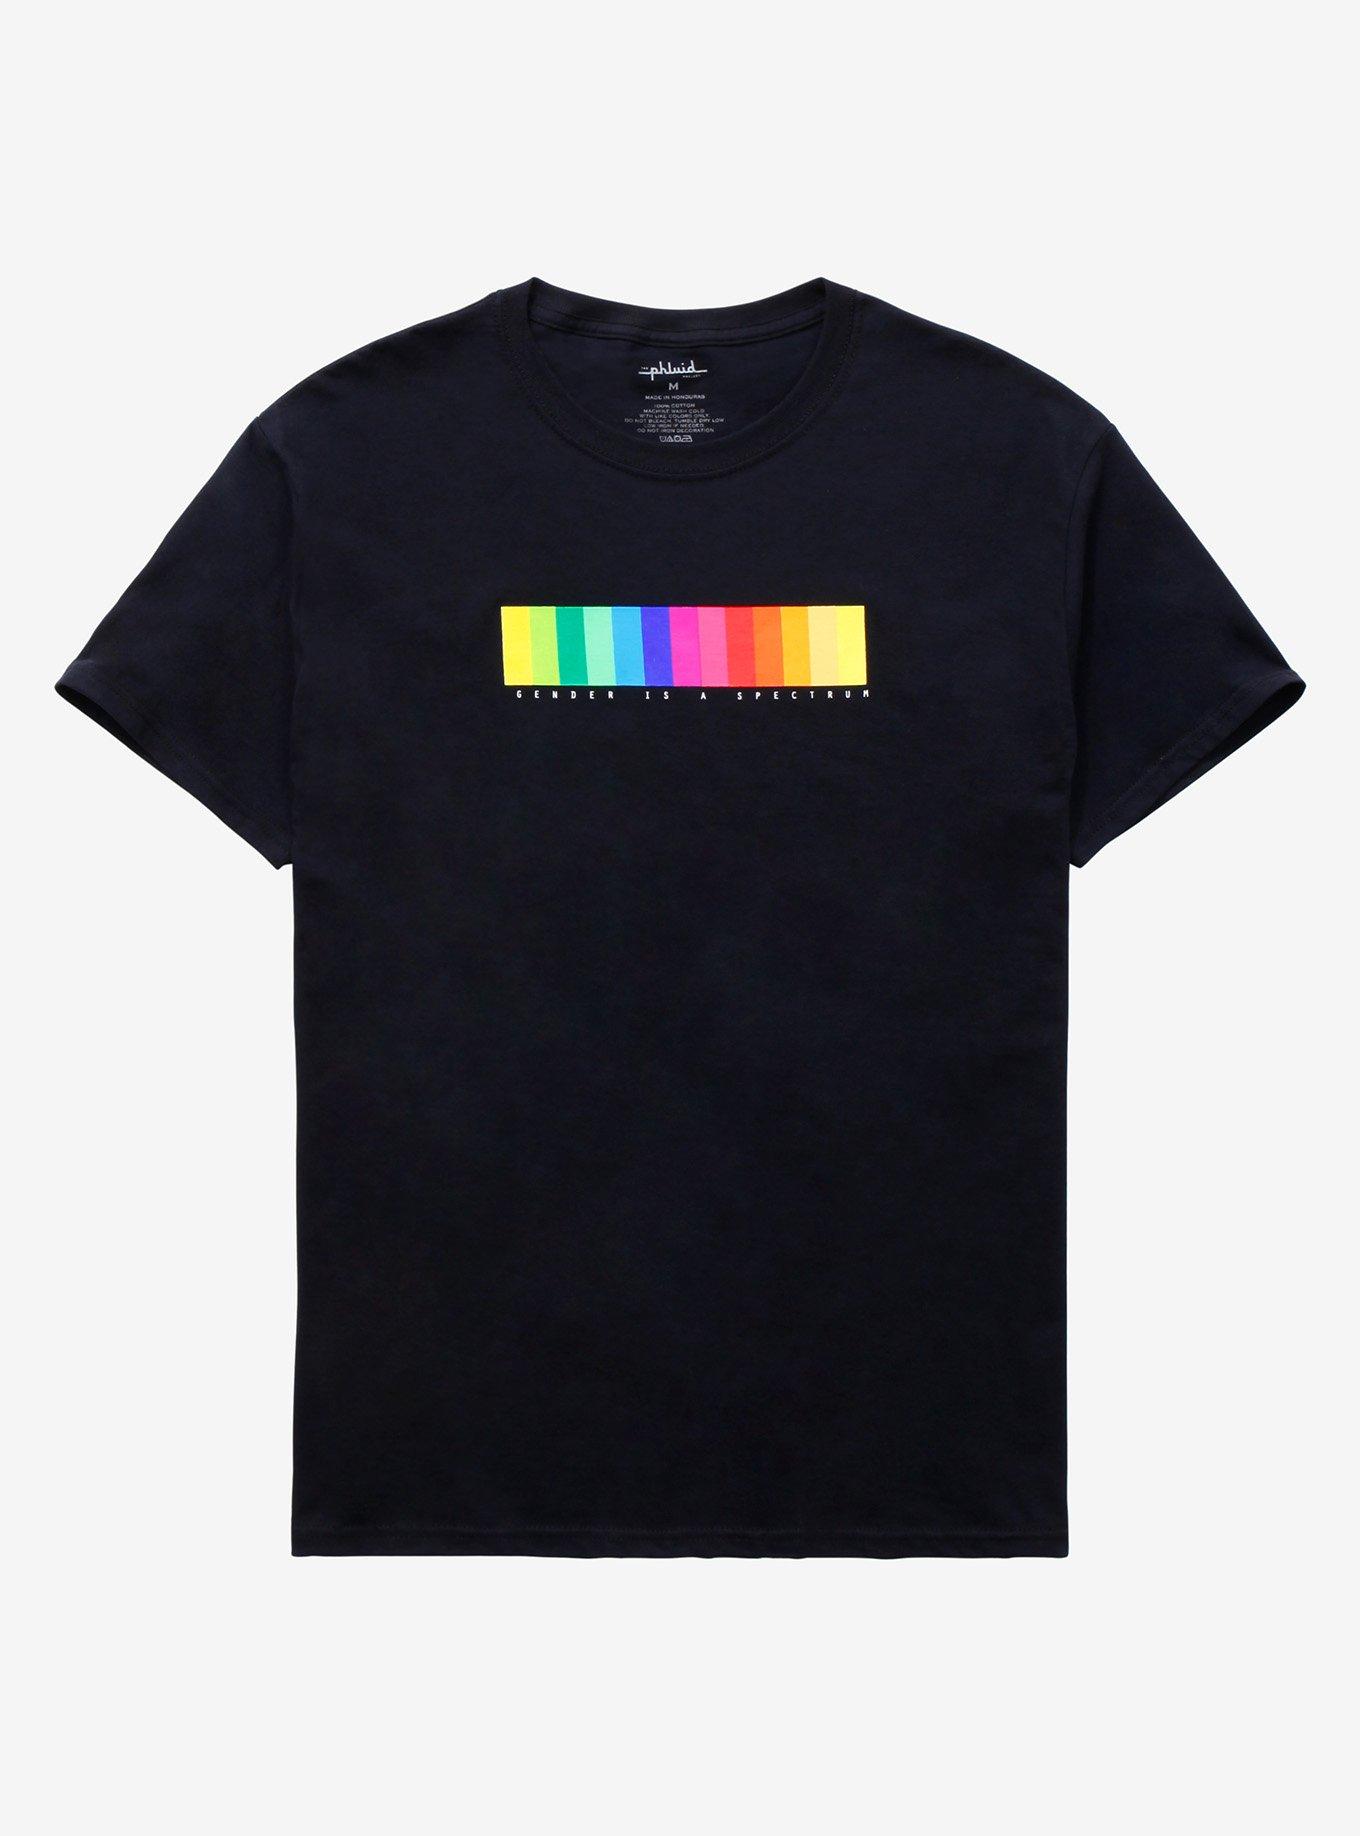 The Phluid Project Gender Is A Spectrum T-Shirt | Hot Topic